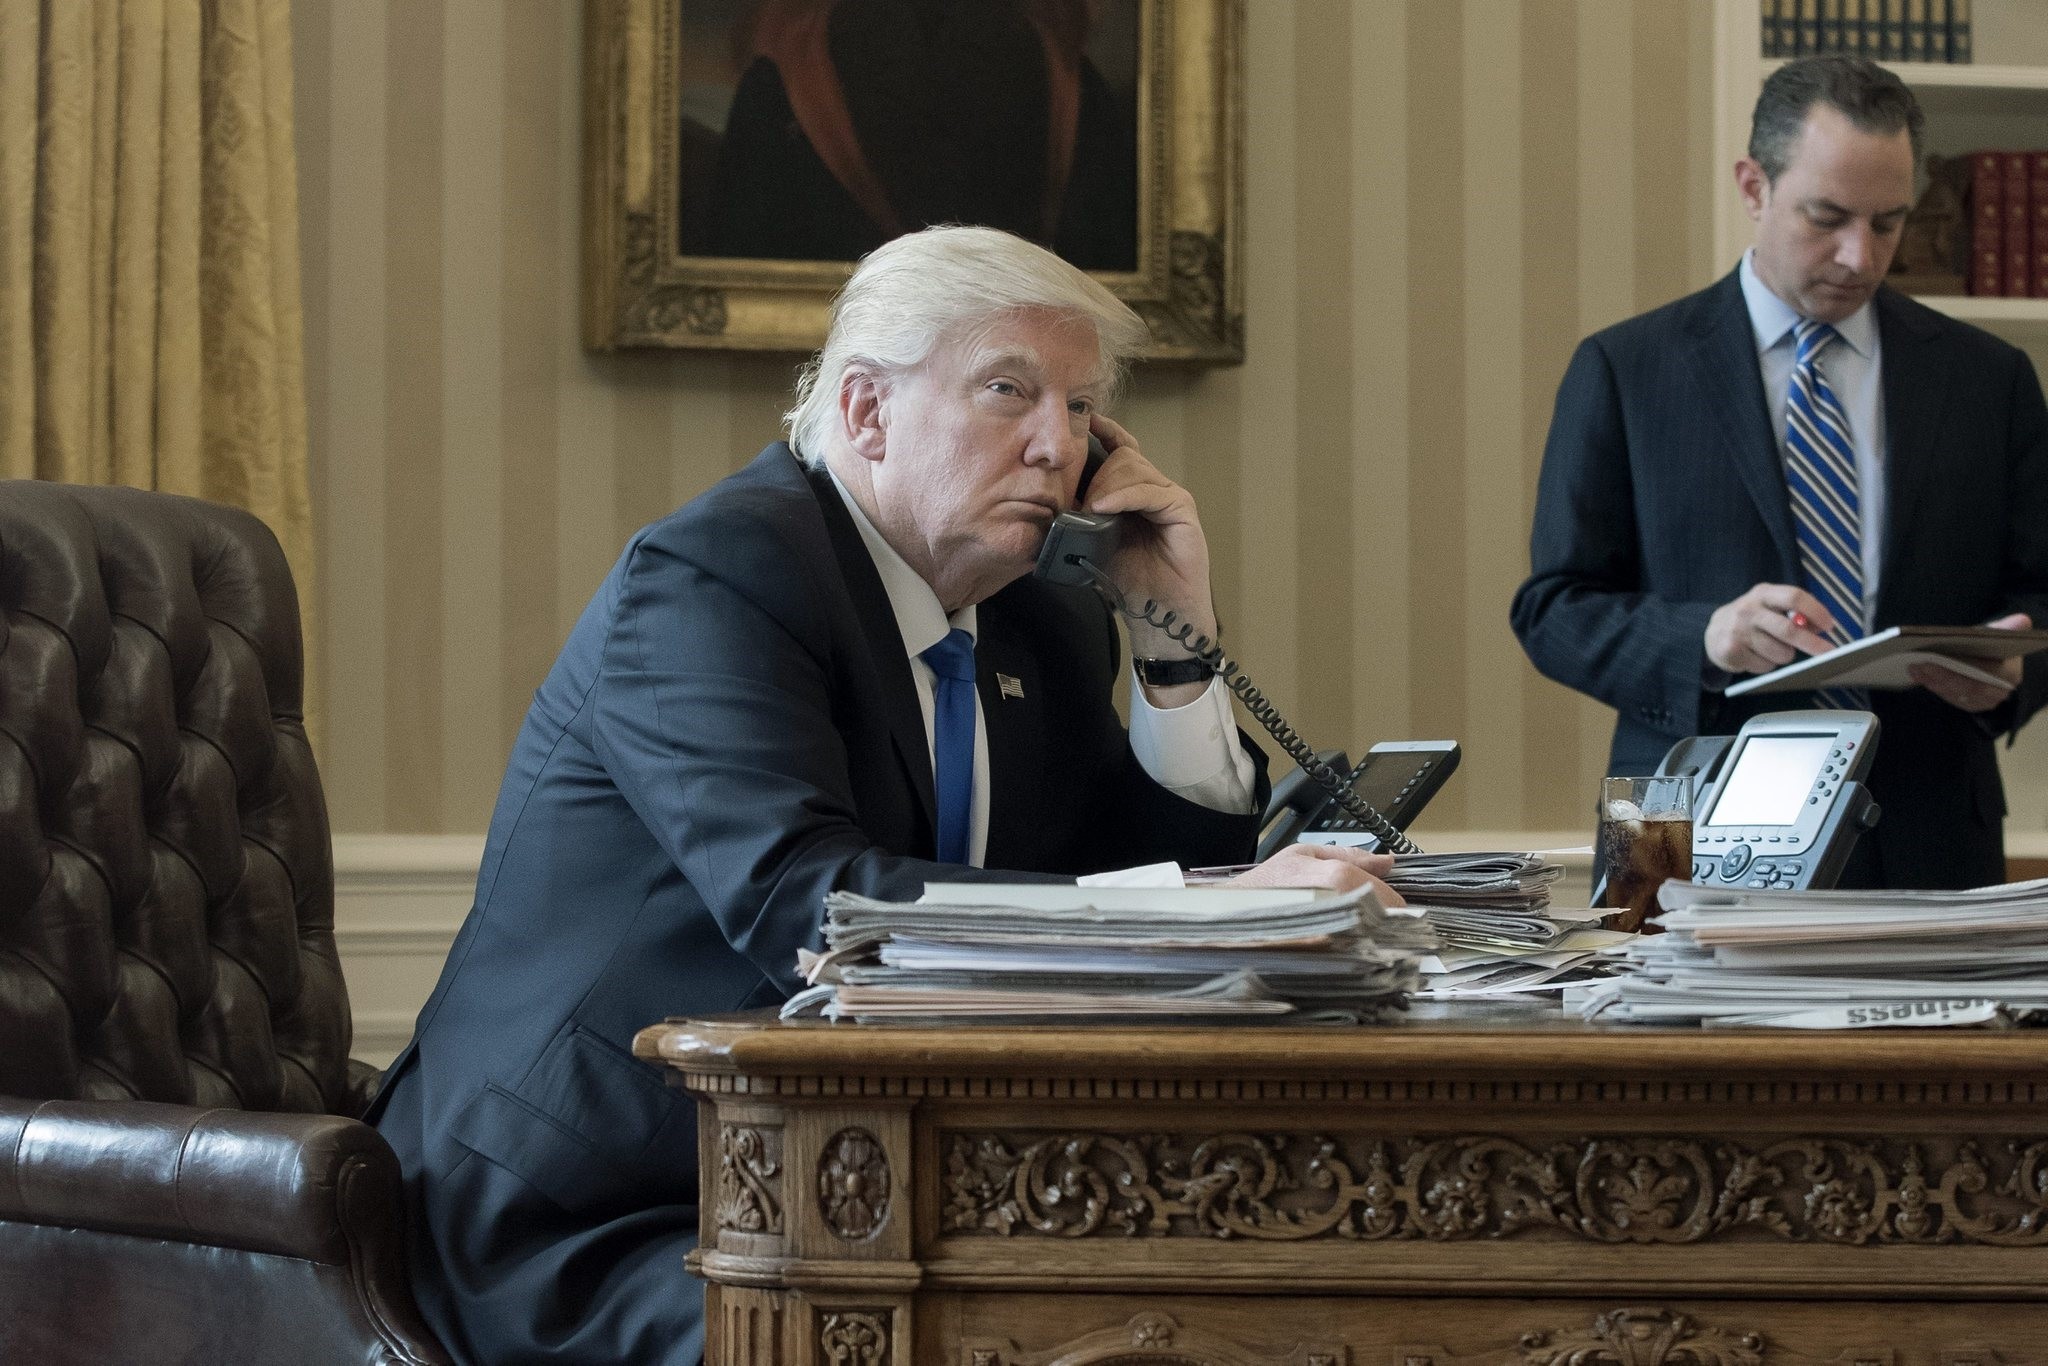 US President Donald J. Trump (L) speaks on the phone with President of Russia Vladimir Putin in the Oval Office of the White House in Washington, DC, USA, 28 January 2017. (EPA Photo)